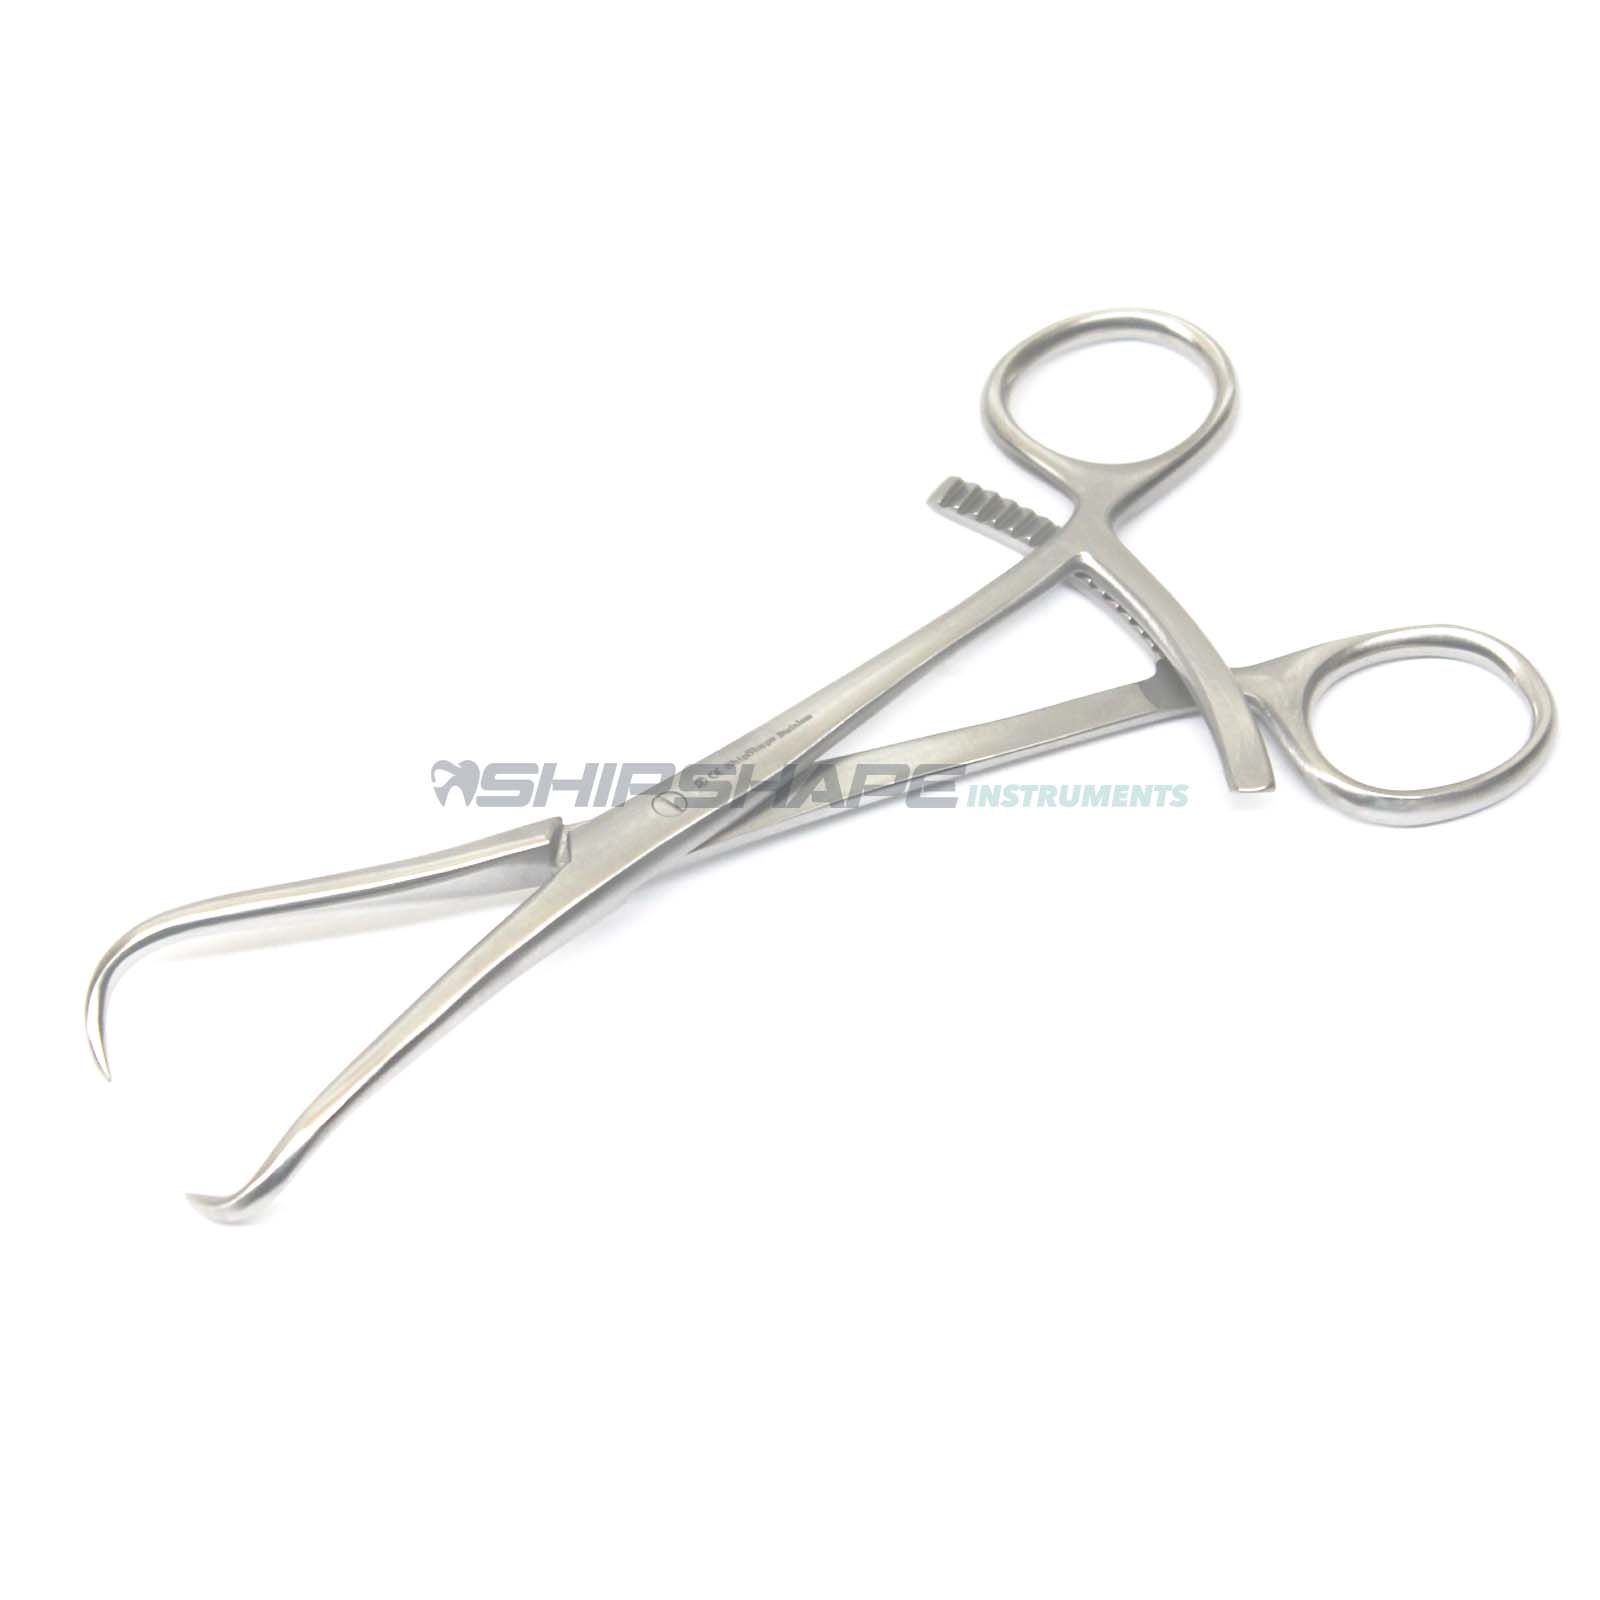 Bone Reduction Clamp 8" Orthopedic Stainless Steel Surgical Instruments-1309